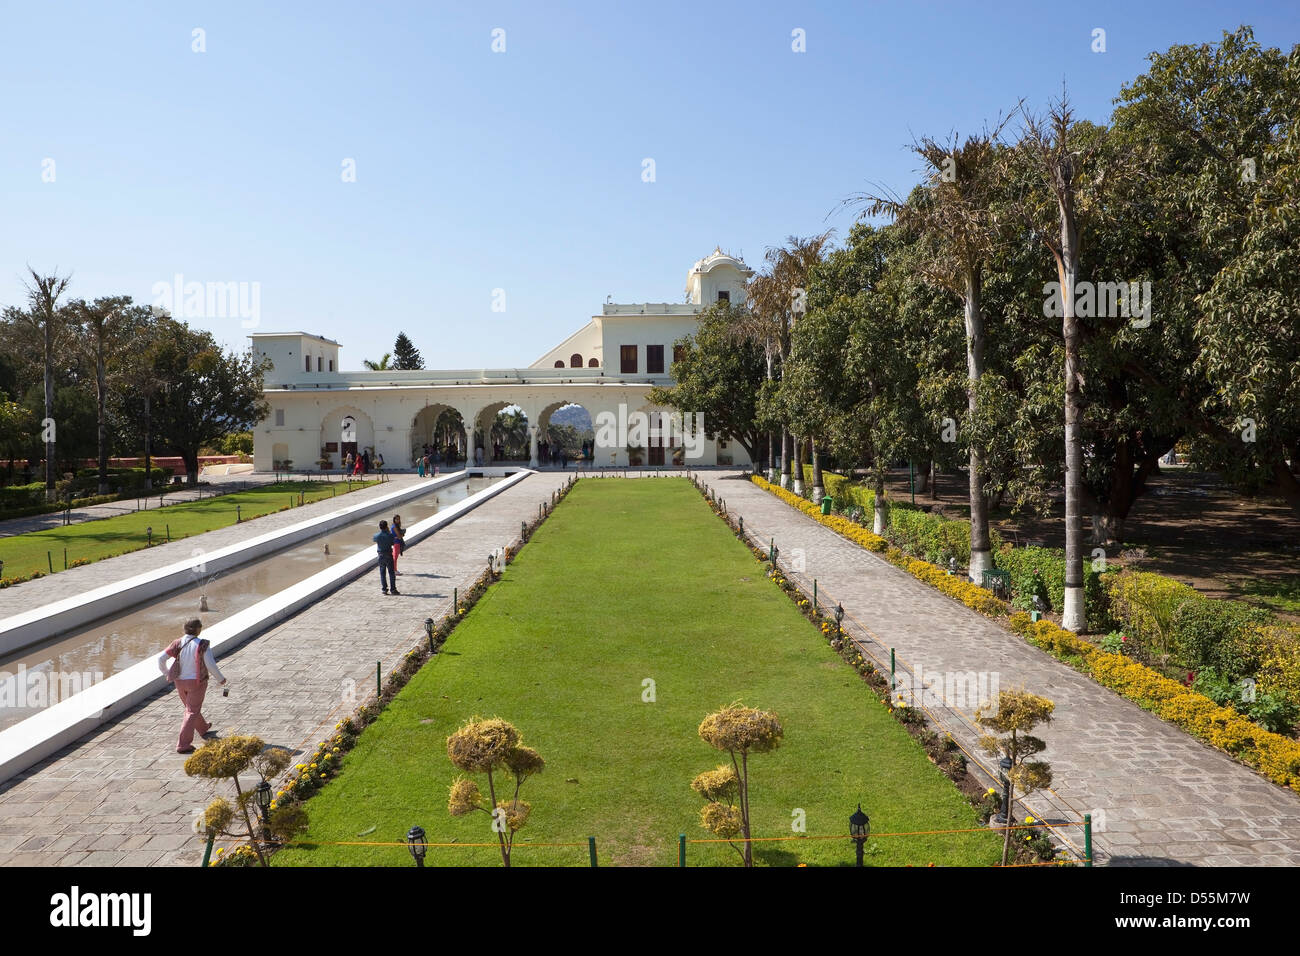 A scenic view at Pinjore Gardens in Haryana, India with white ornate architecture and green lawns. Stock Photo